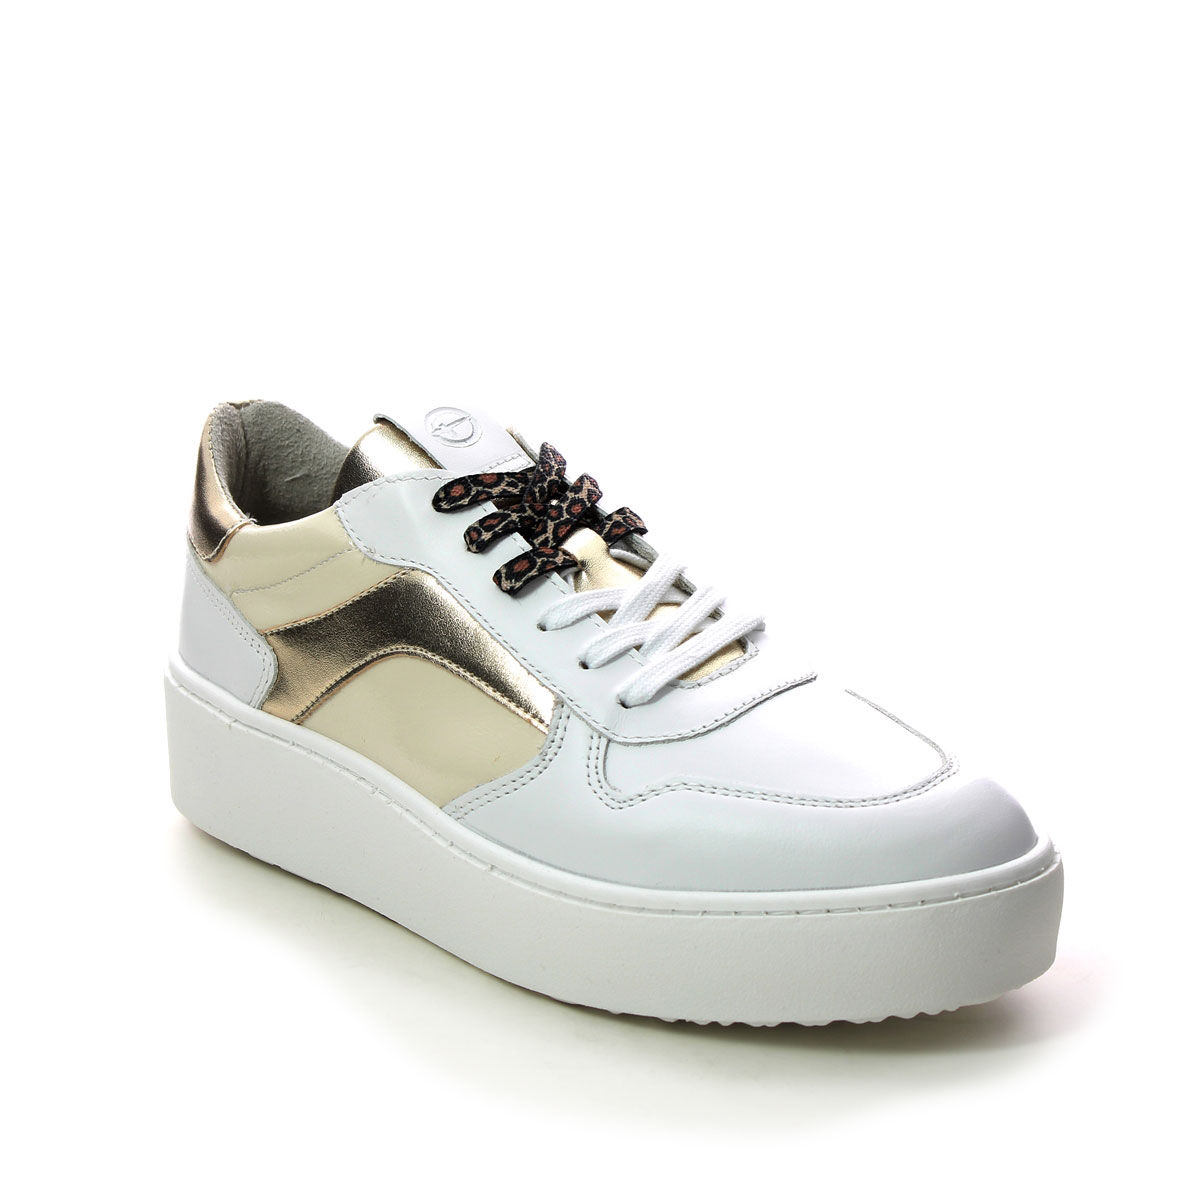 Tamaris Grandslam White Gold Womens Trainers 23704-28-190 In Size 41 In Plain White Gold